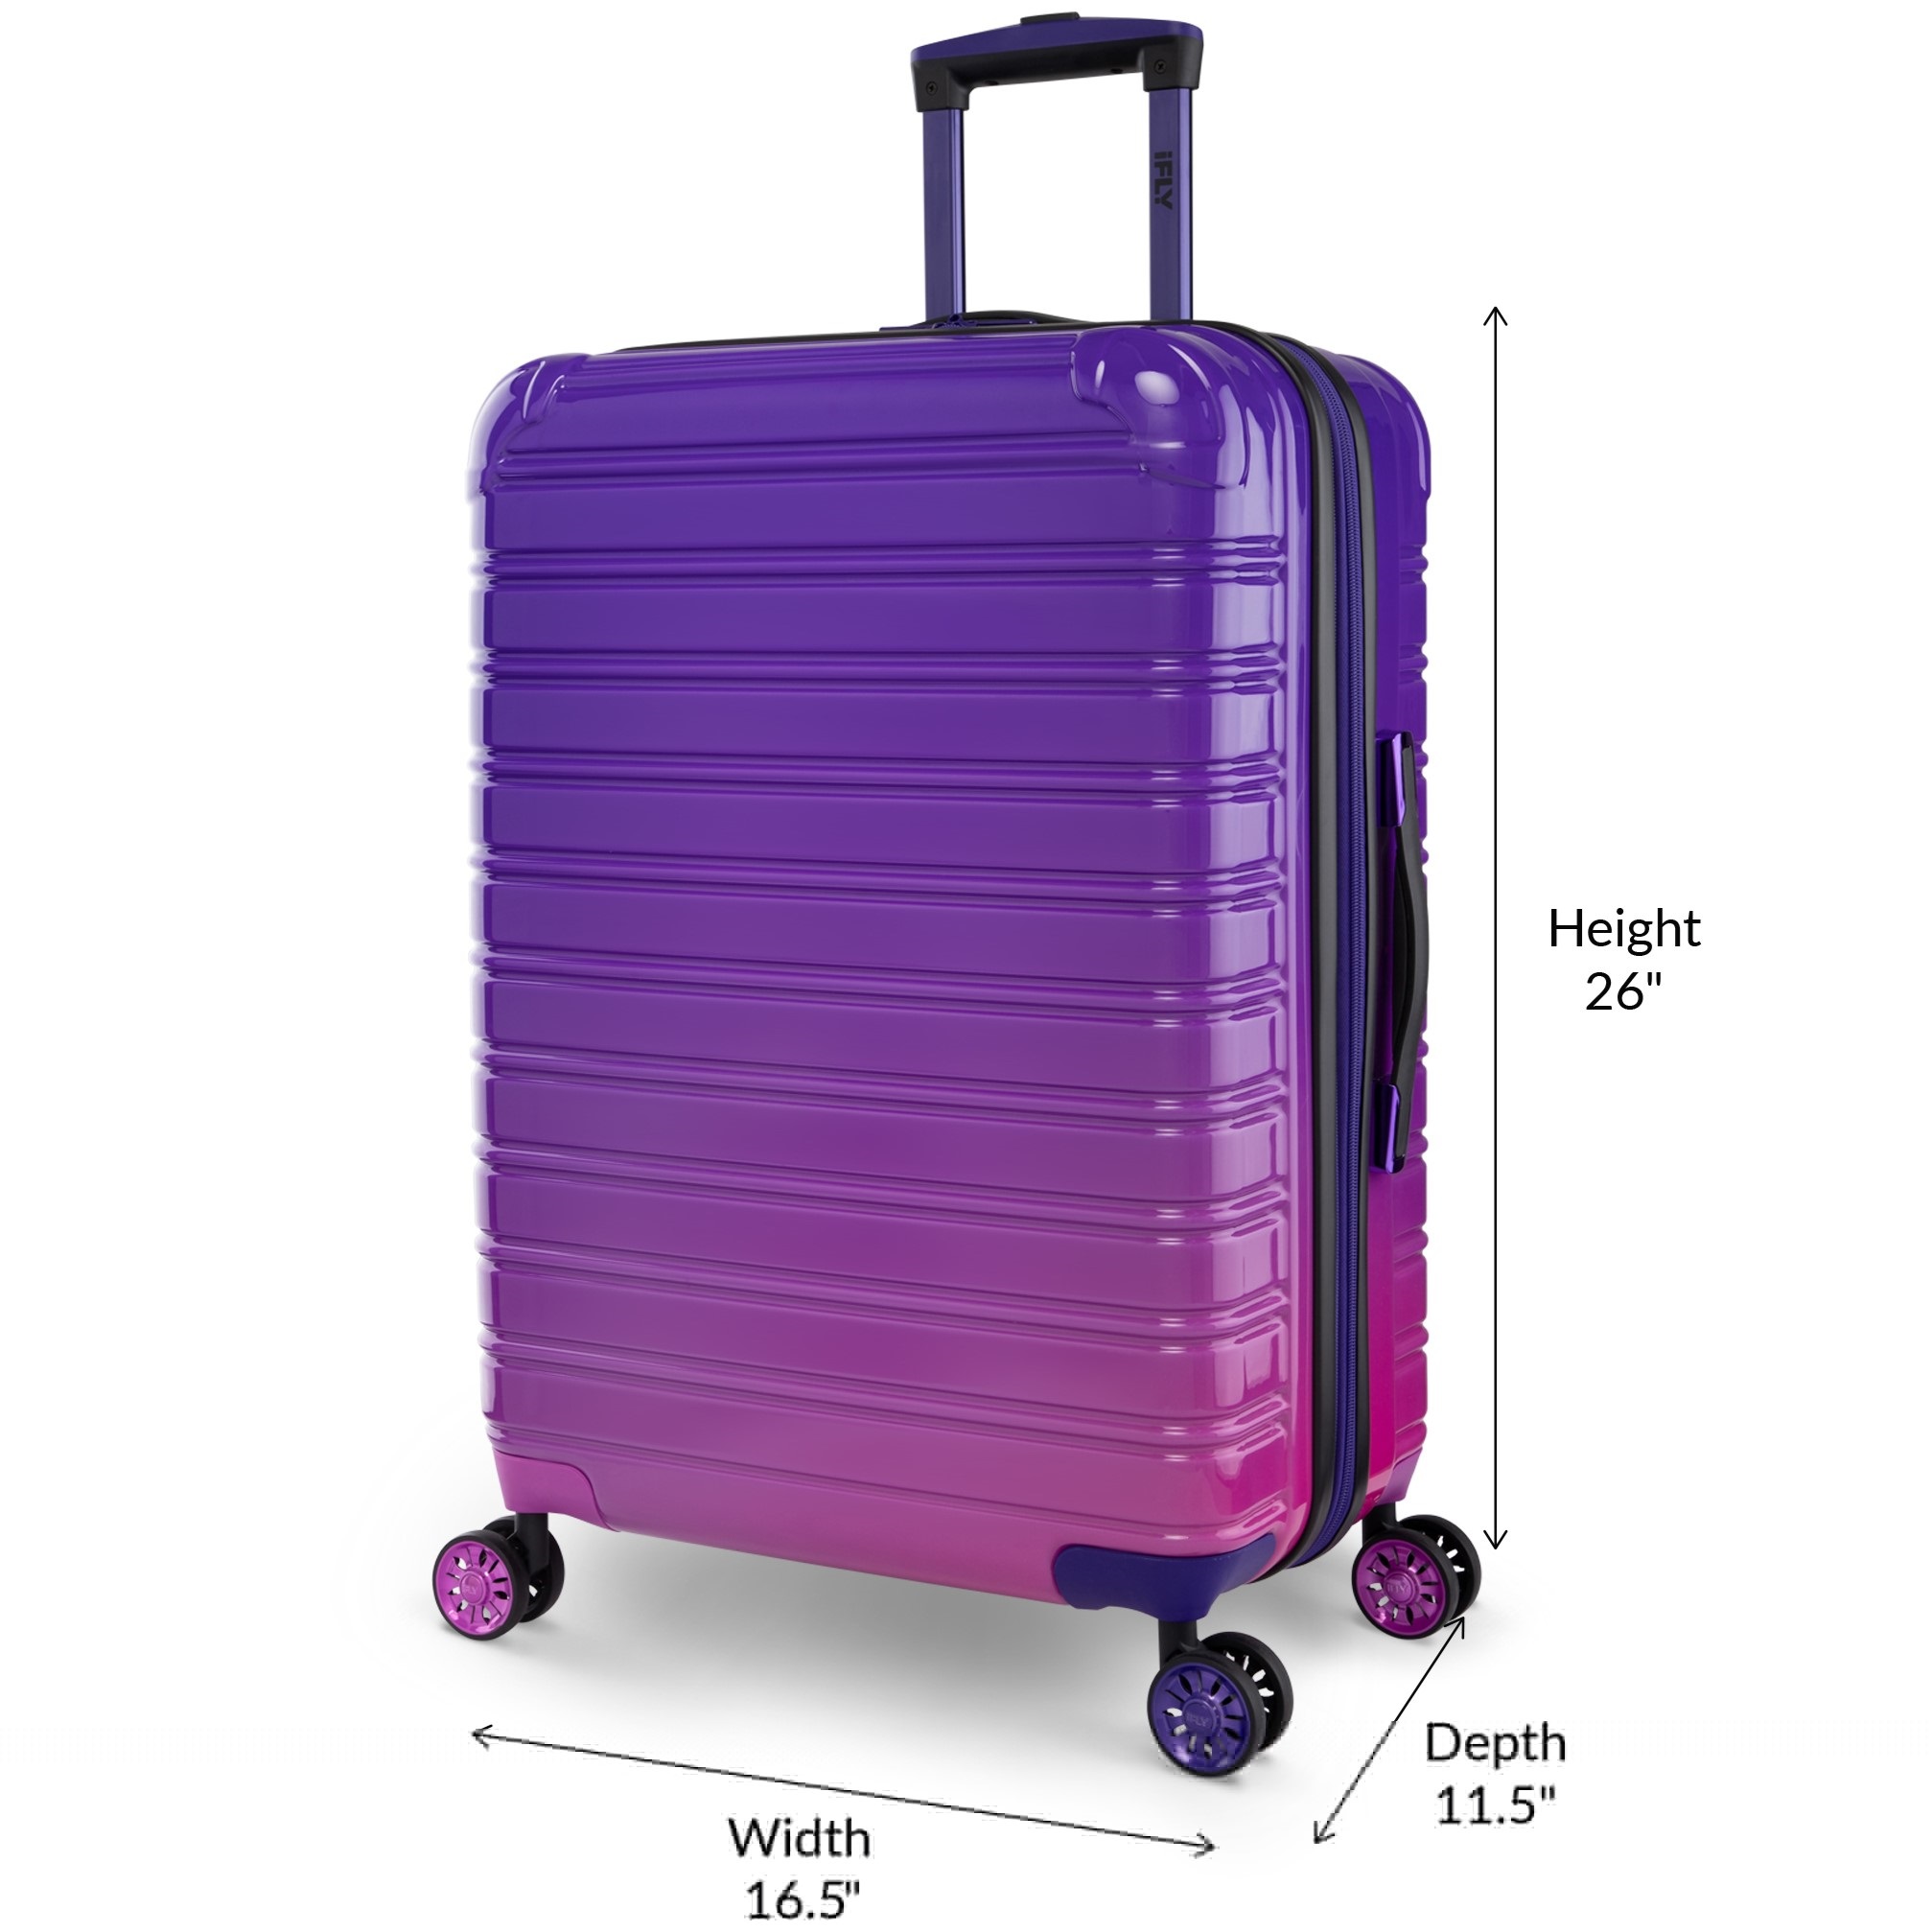 VALI MÀU TÍM LOANG DU LỊCH IFLY FIBERTECH OMBRE HARDSIDE LUGGAGE IN MIDNIGHT BERRY 12